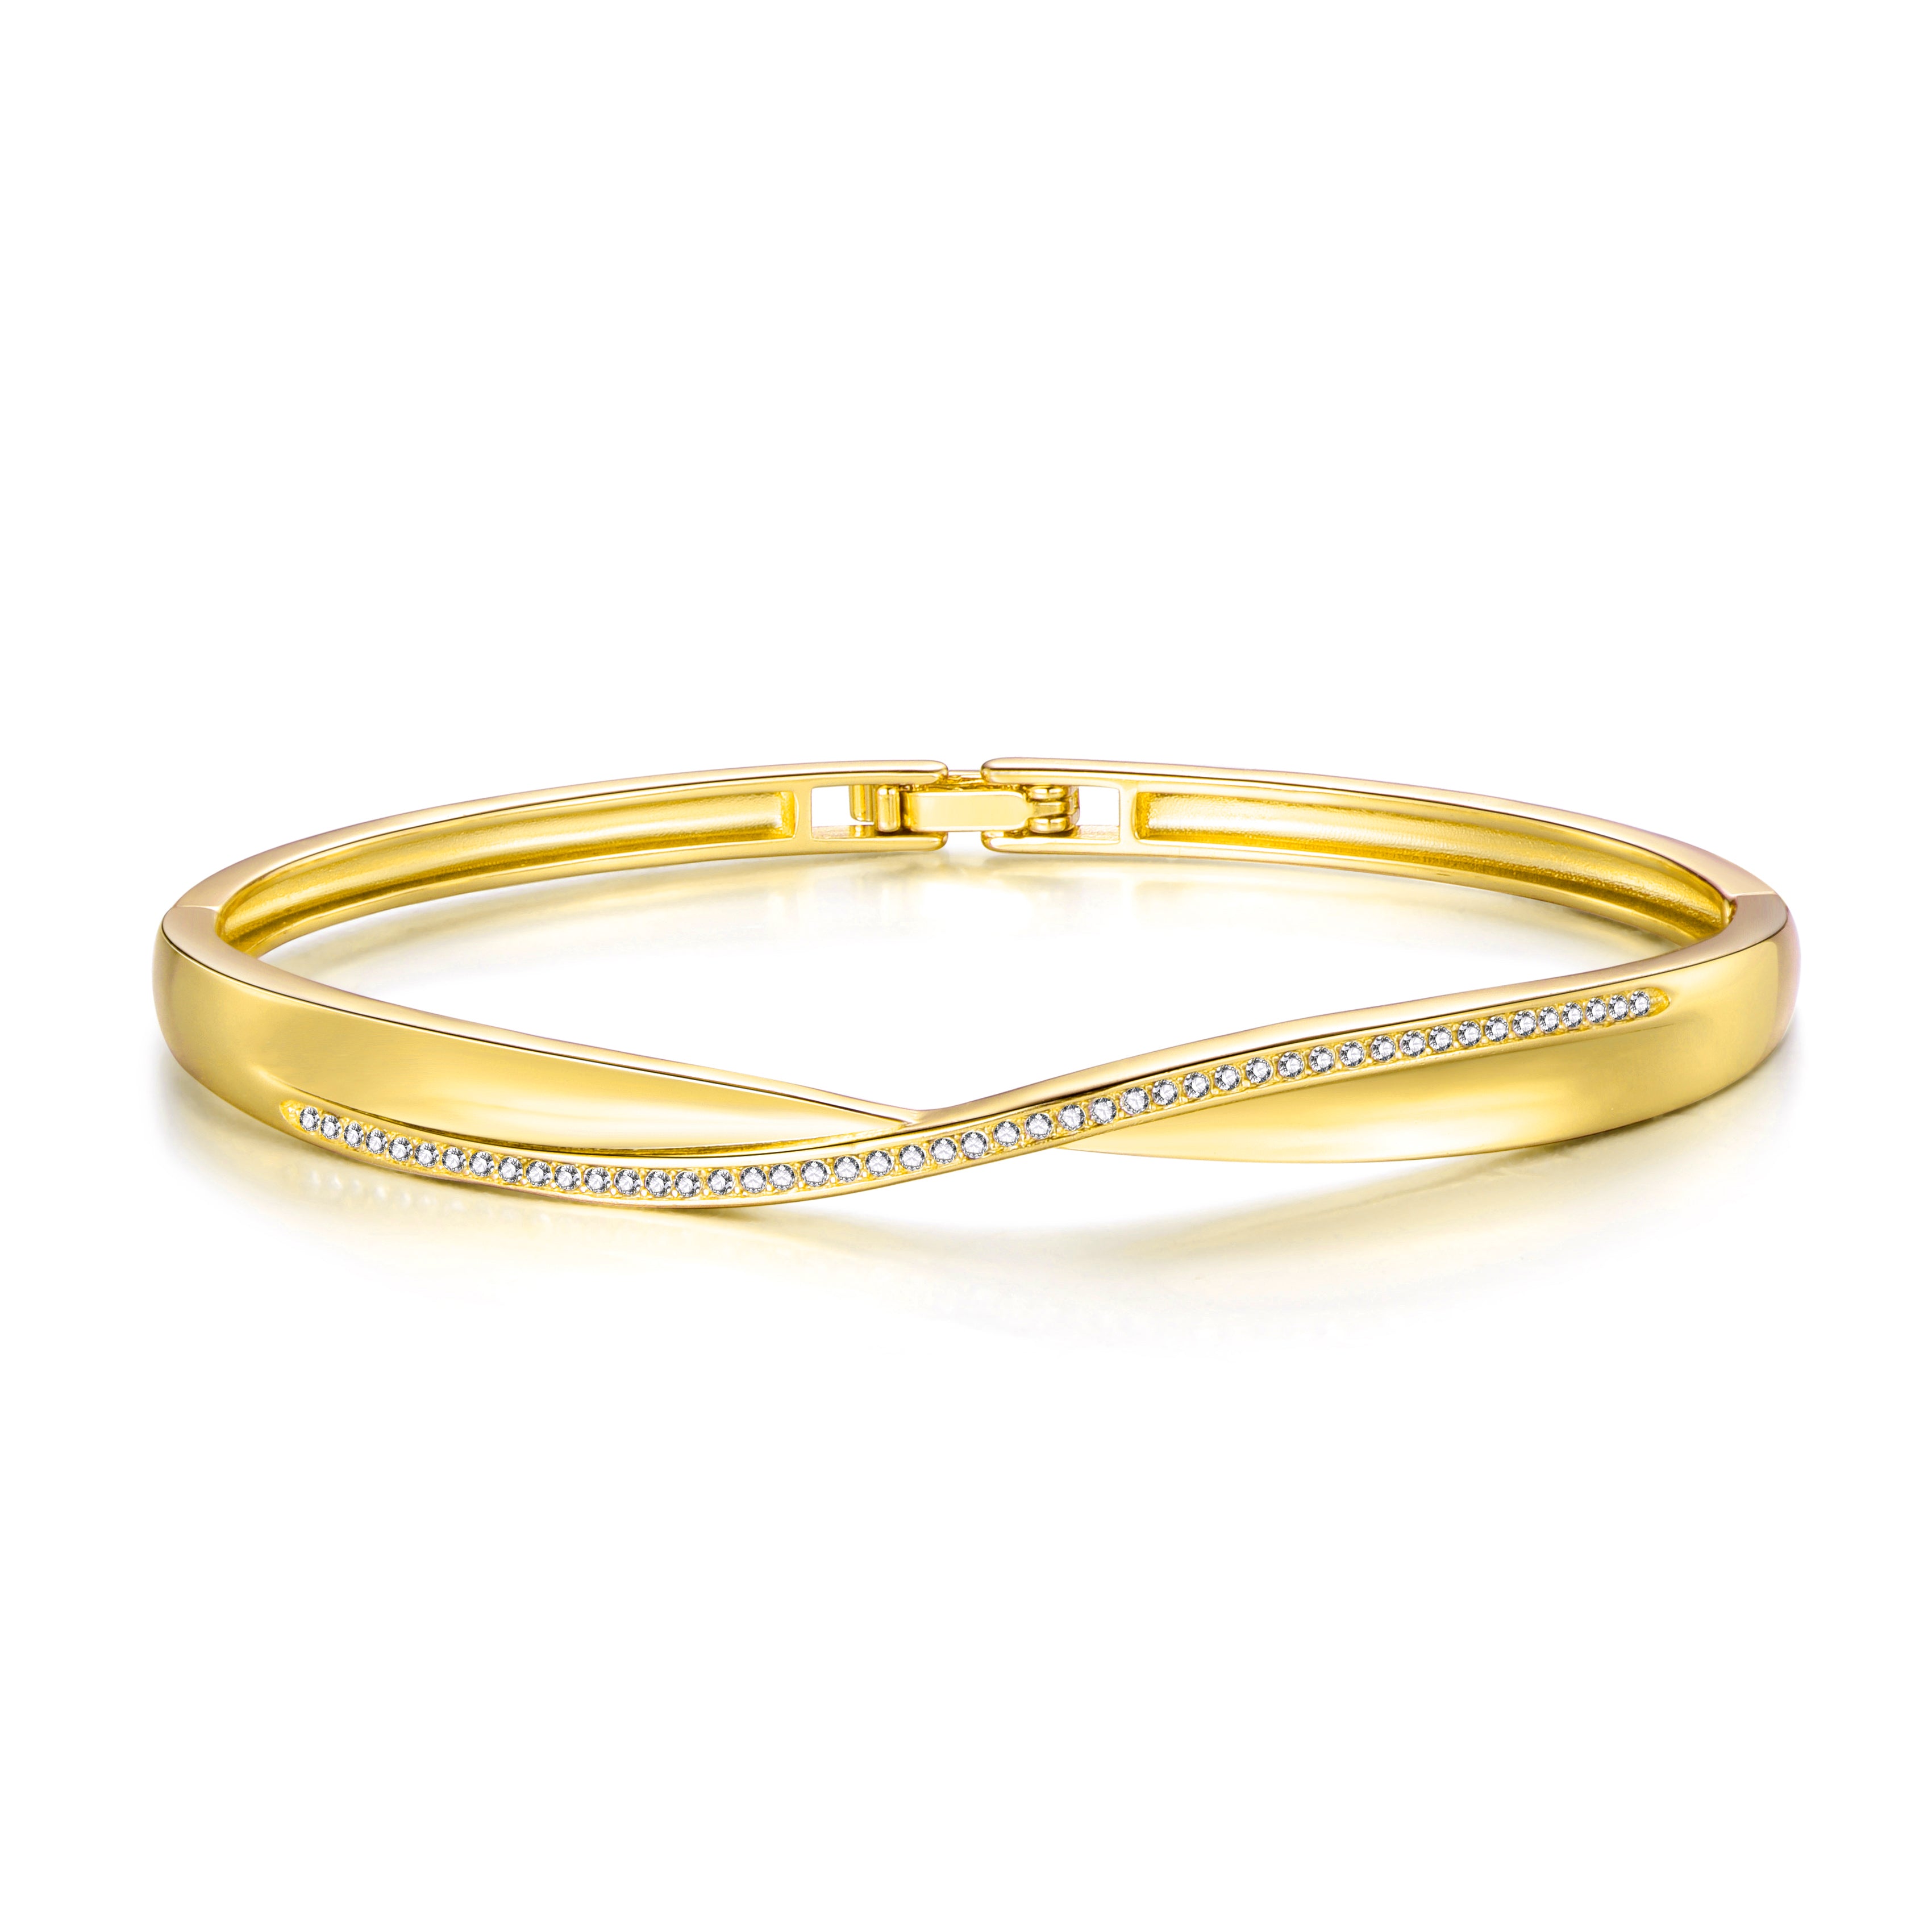 Gold Plated Arc Bangle Created with Zircondia® Crystals by Philip Jones Jewellery